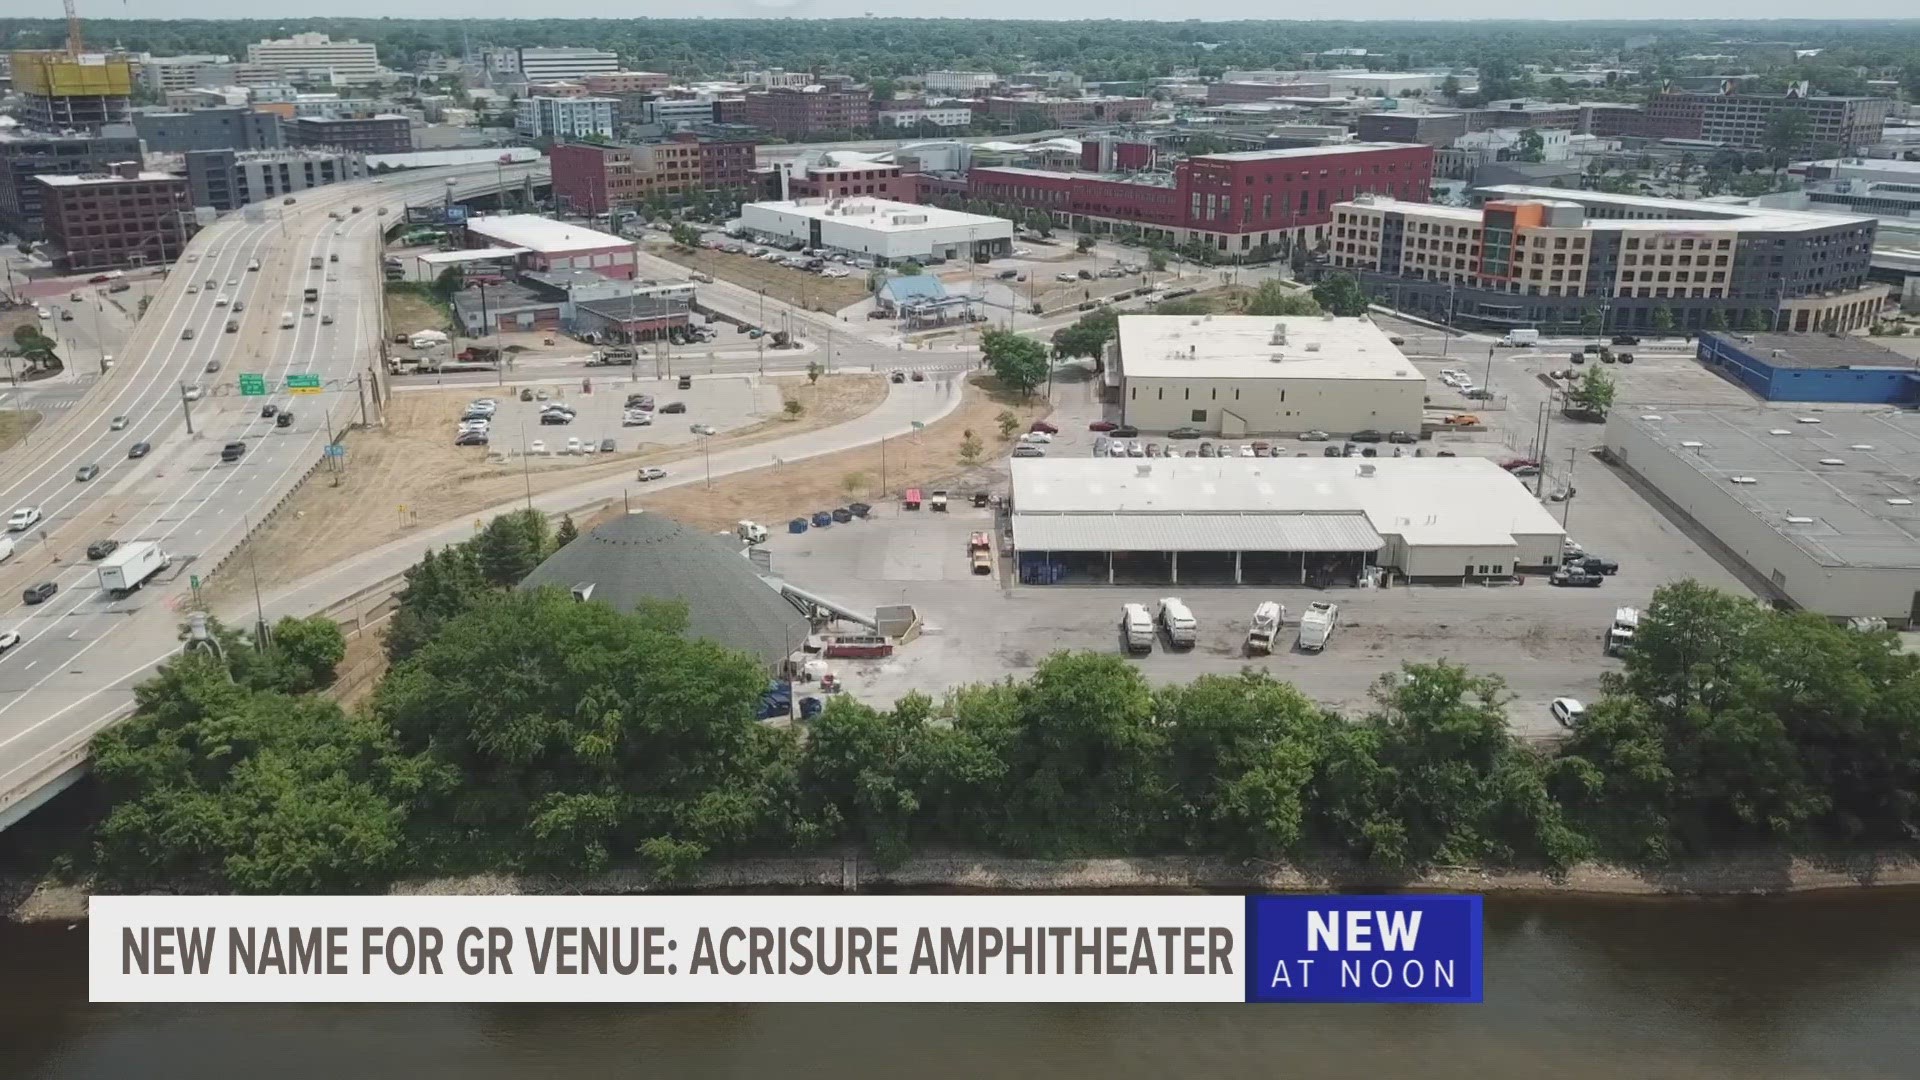 The Grand Rapids amphitheater will be named the Acrisure Amphitheater after the financial tech company that recently moved its headquarters to Grand Rapids.